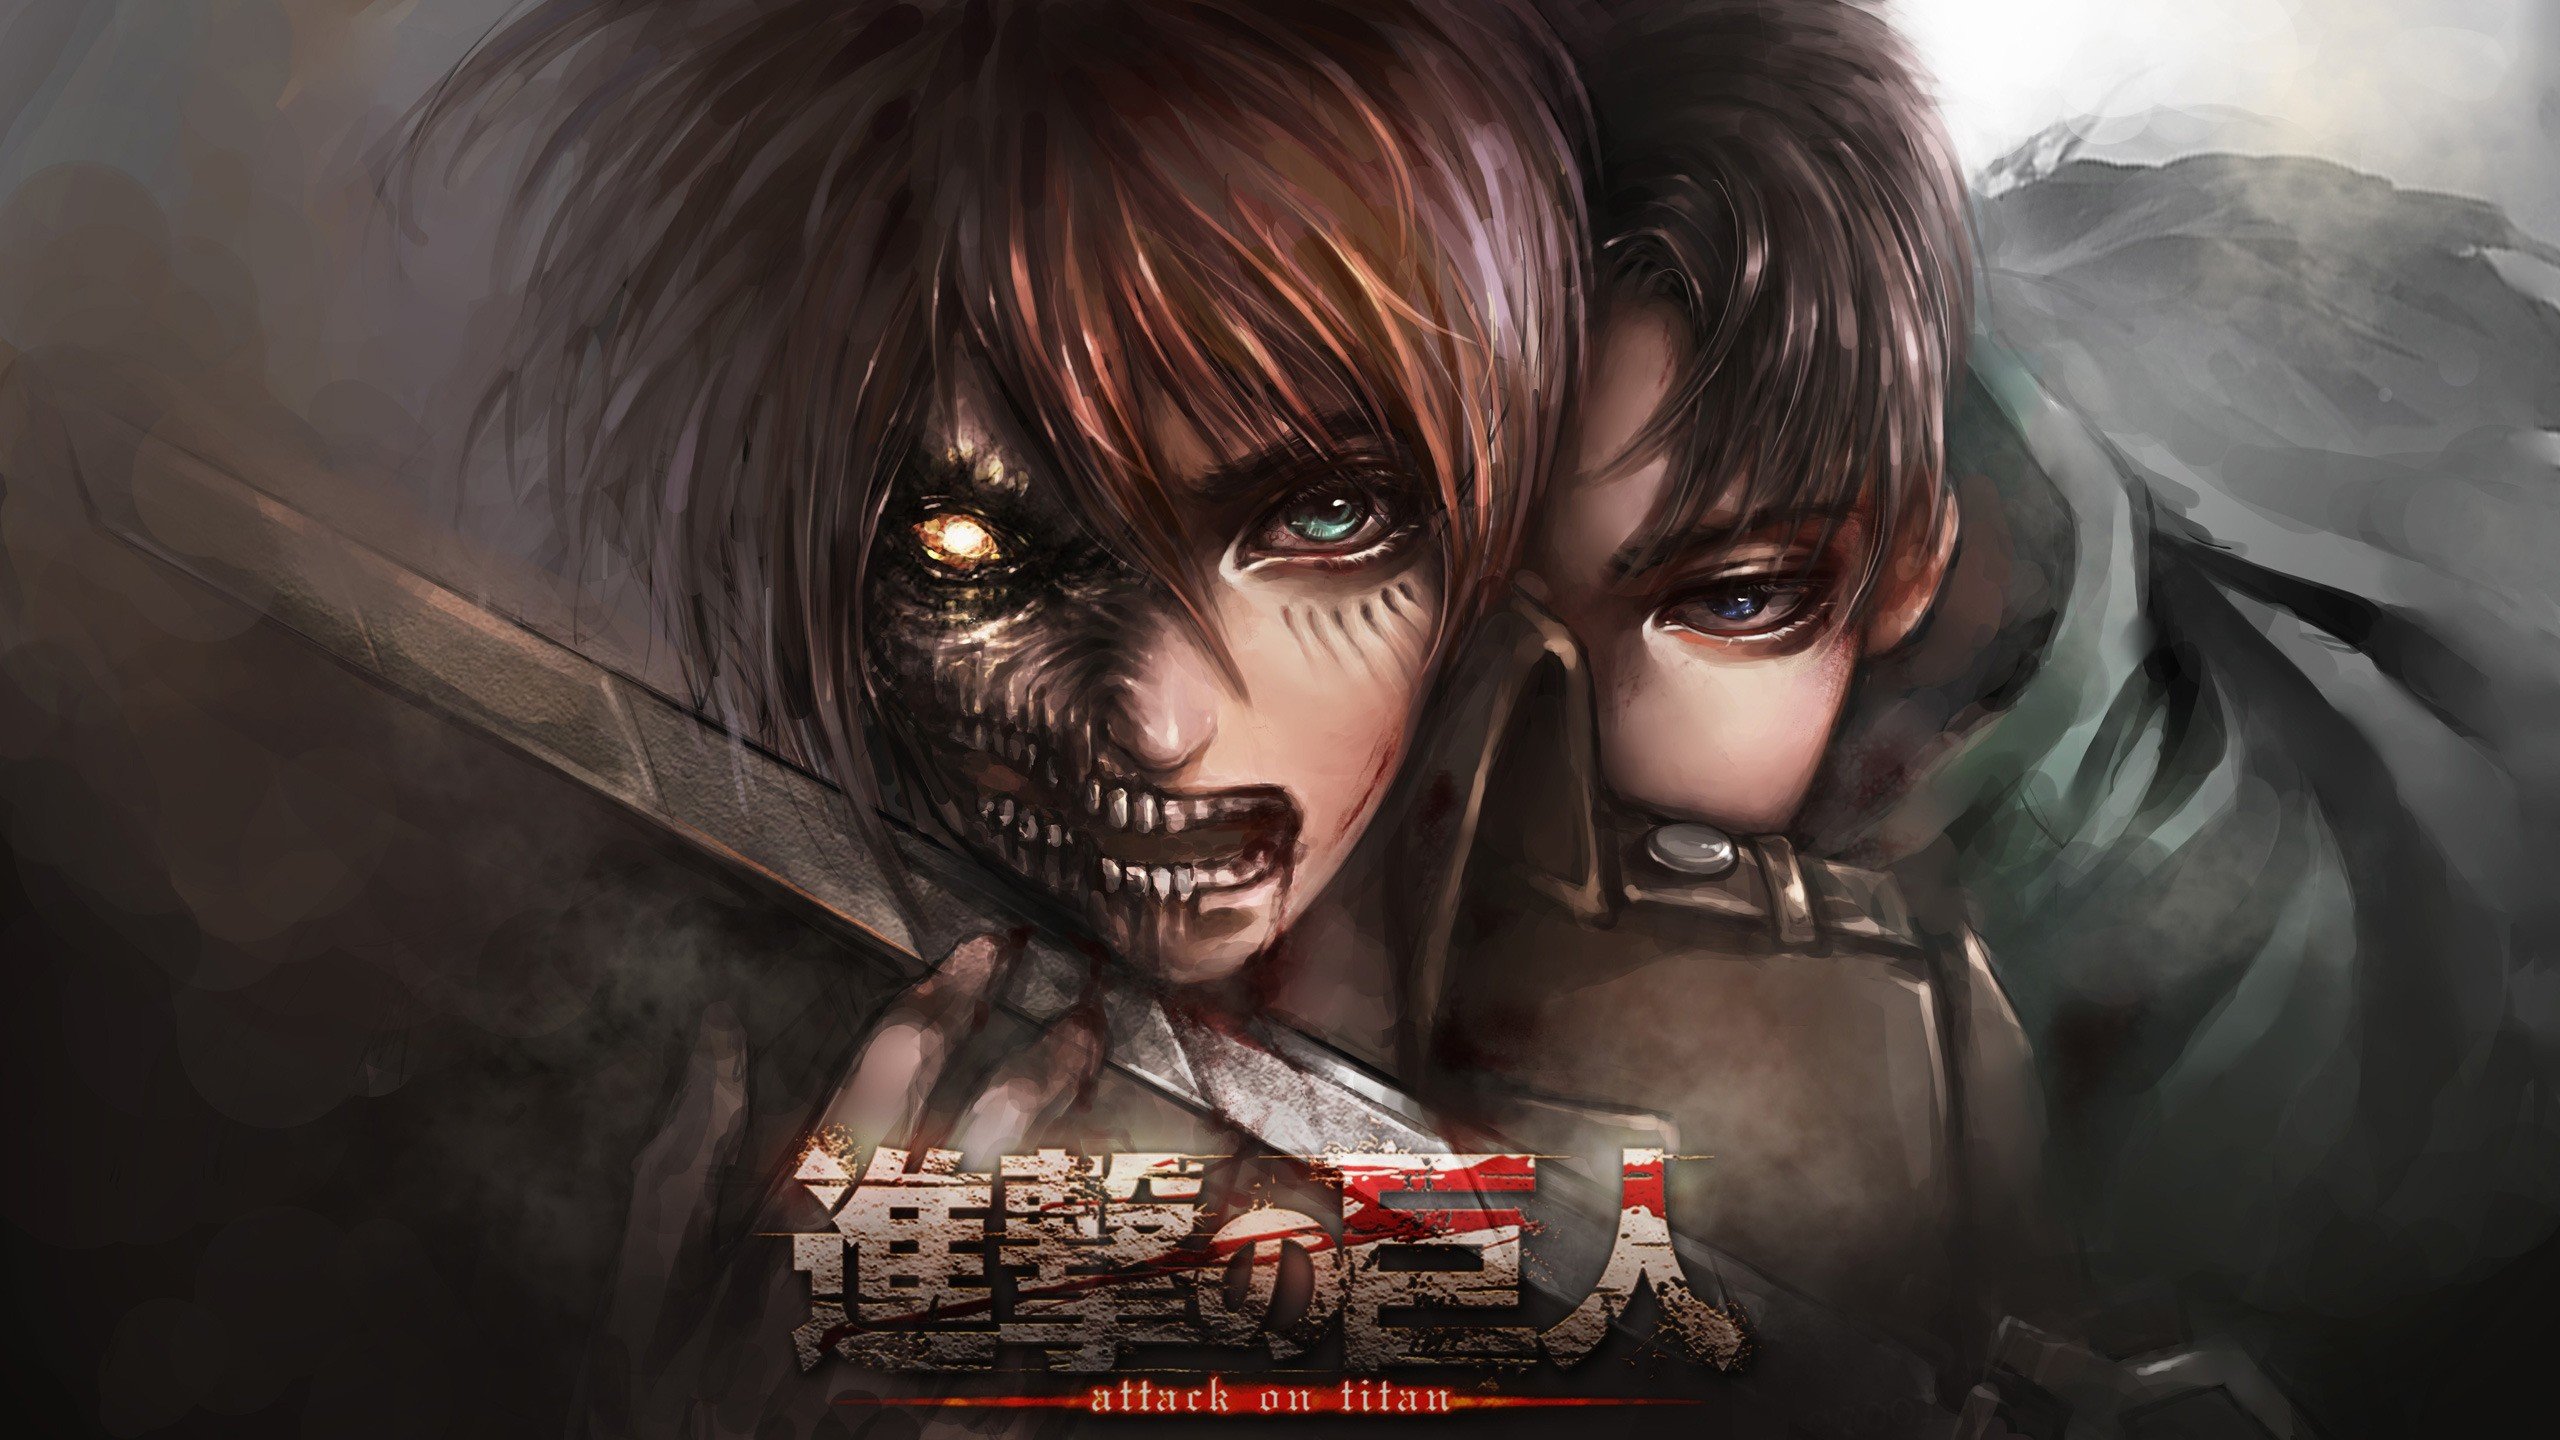 Awesome Attack On Titan free wallpaper ID:206056 for hd 2560x1440 desktop